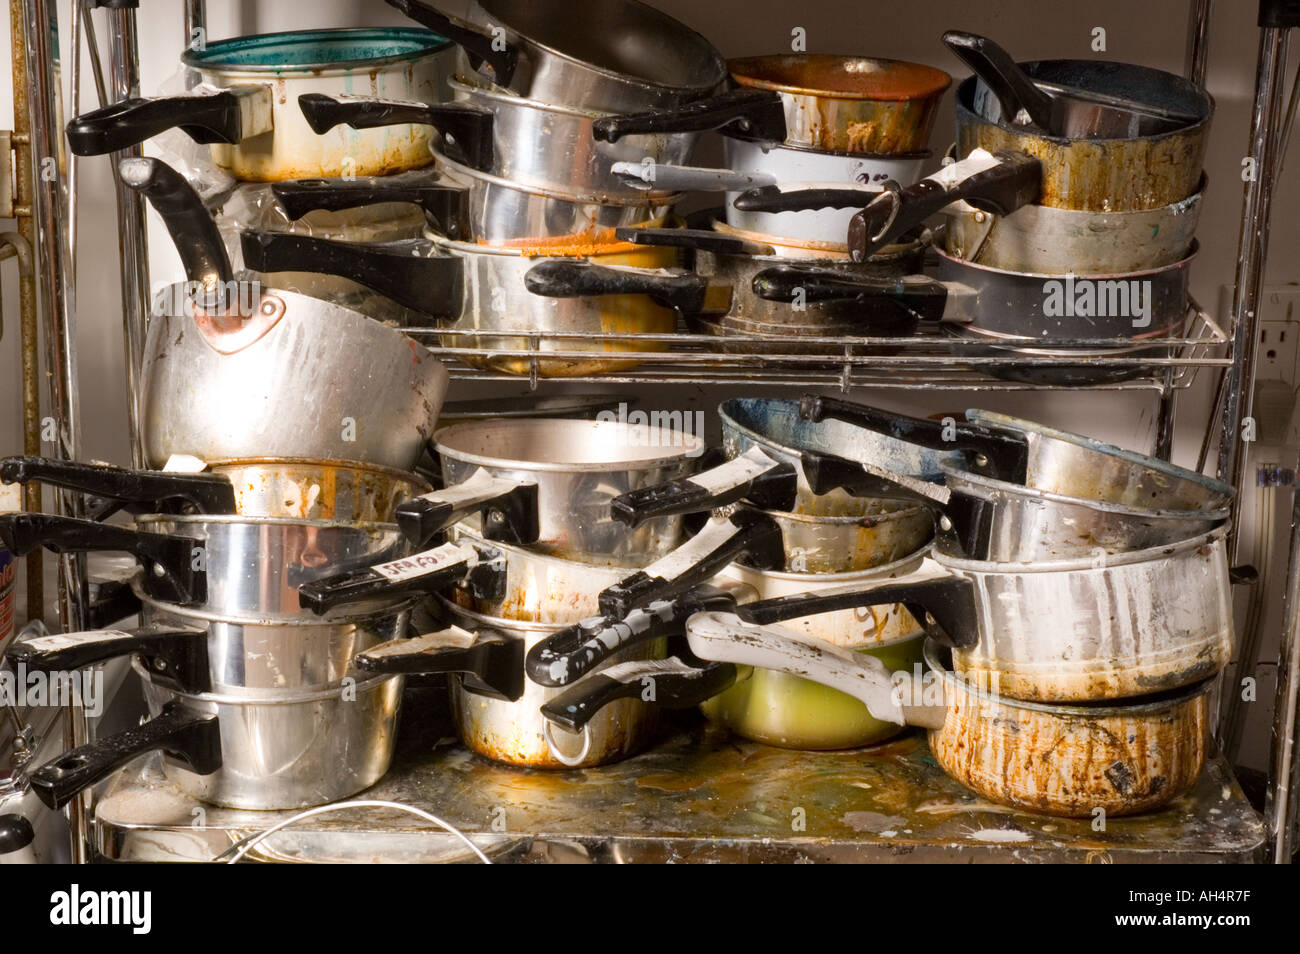 Pots and Pans in a messy stack Stock Photo